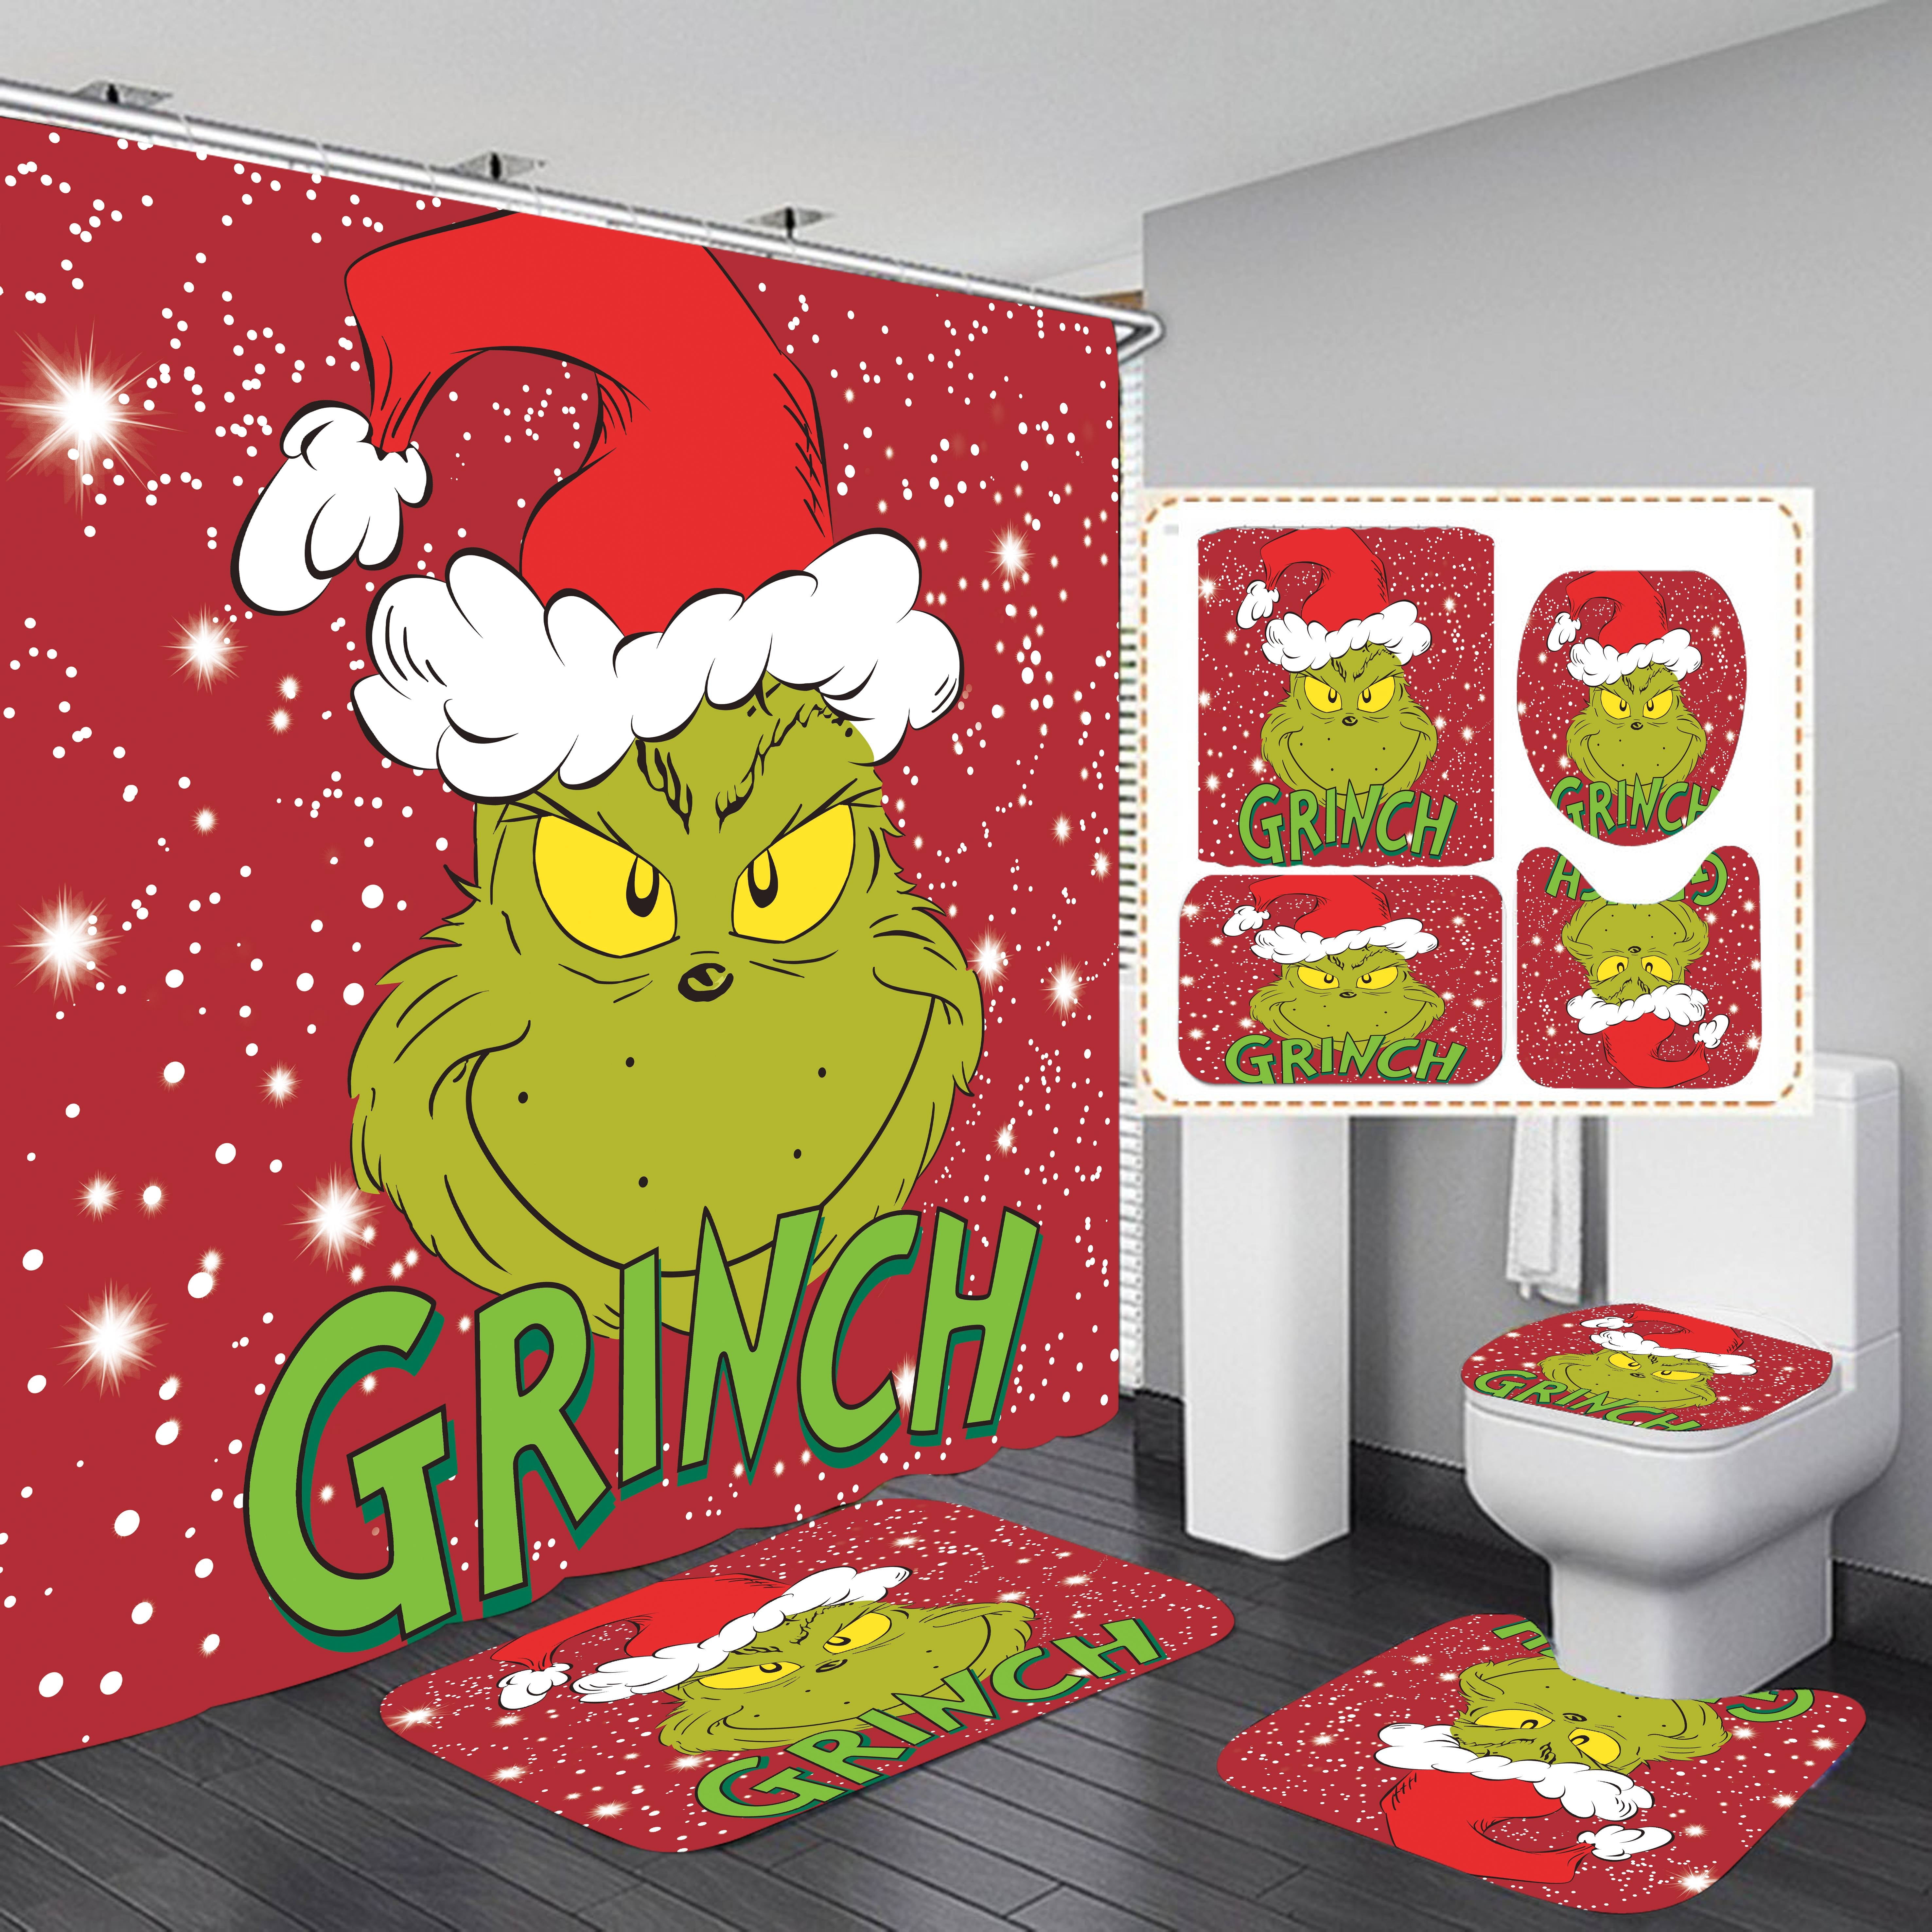 Christmas Shower Curtain Set How The Grinch Stole Christmas Shower Curtain with 12 Hooks Bathroom Set, Holiday Home Decor (72x72 Inch)